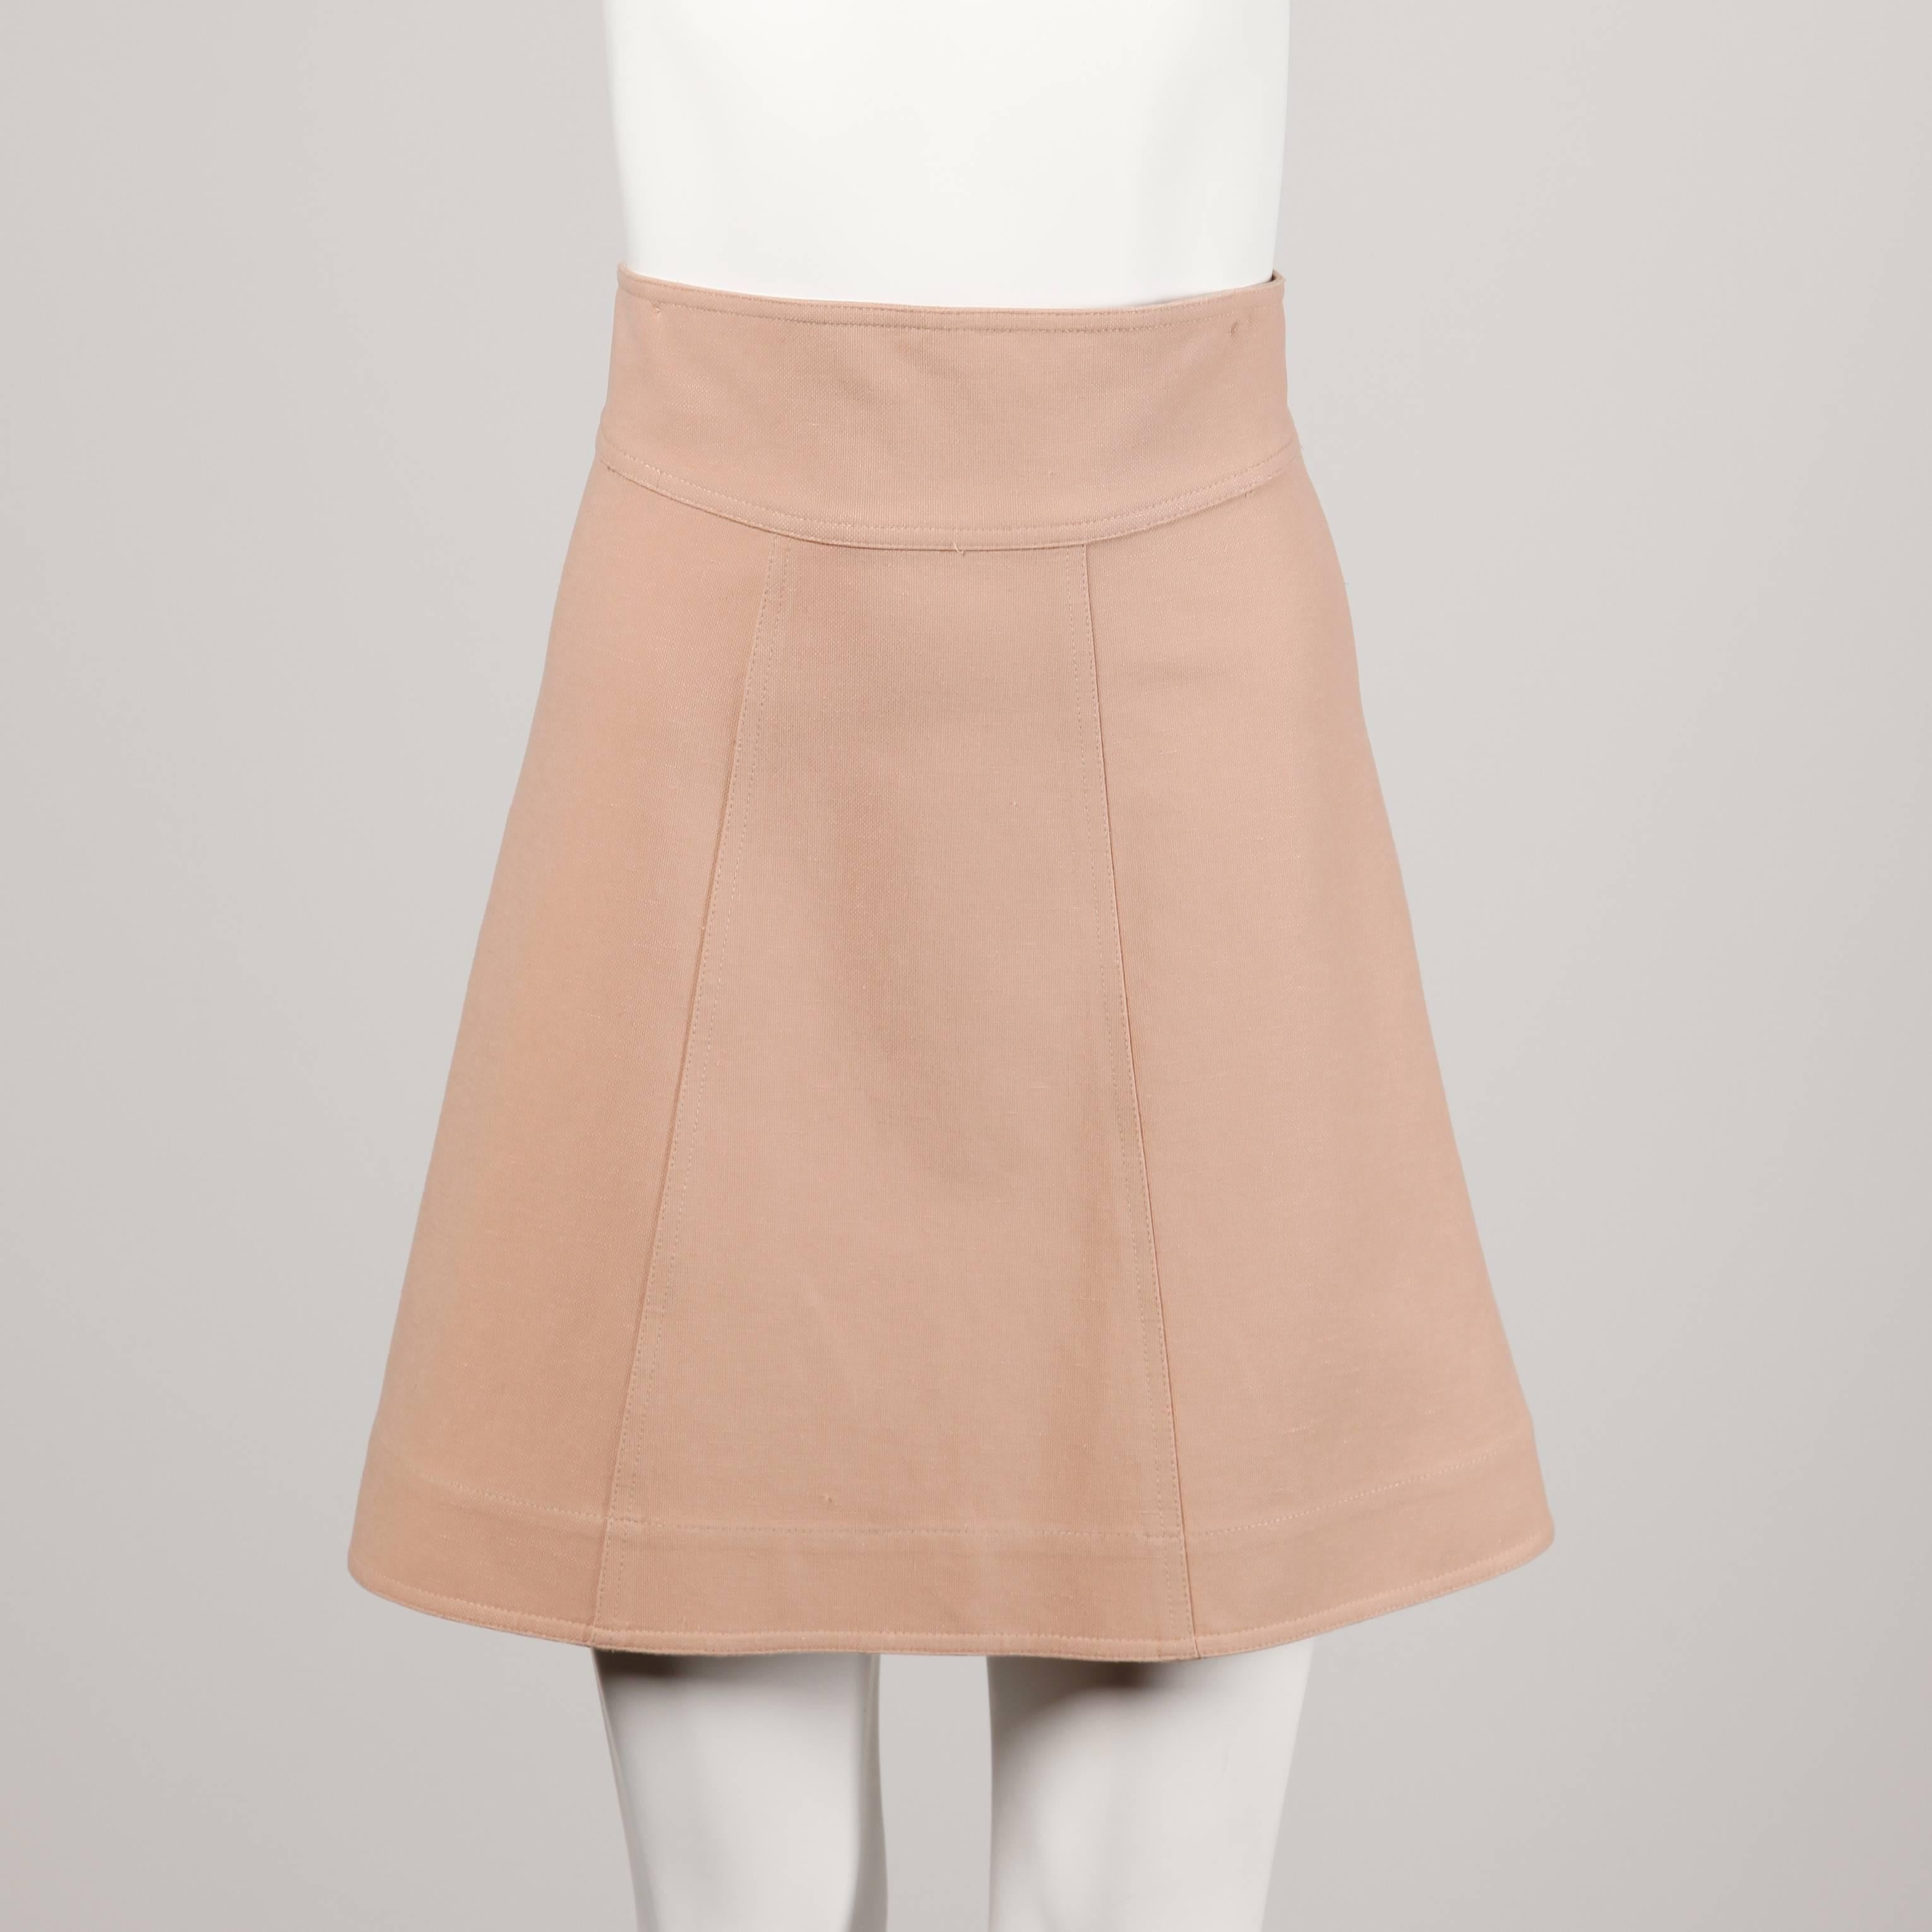 Stunning blush pink avant garde jacket and skirt ensemble by Fendi. Unique 3/4 length sleeves and double breasted buttons on the jacket. A-line cut on the skirt. Wear together or as separates!

Details: 

Unlined
Skirt: Back Zip and Button/ Jacket: